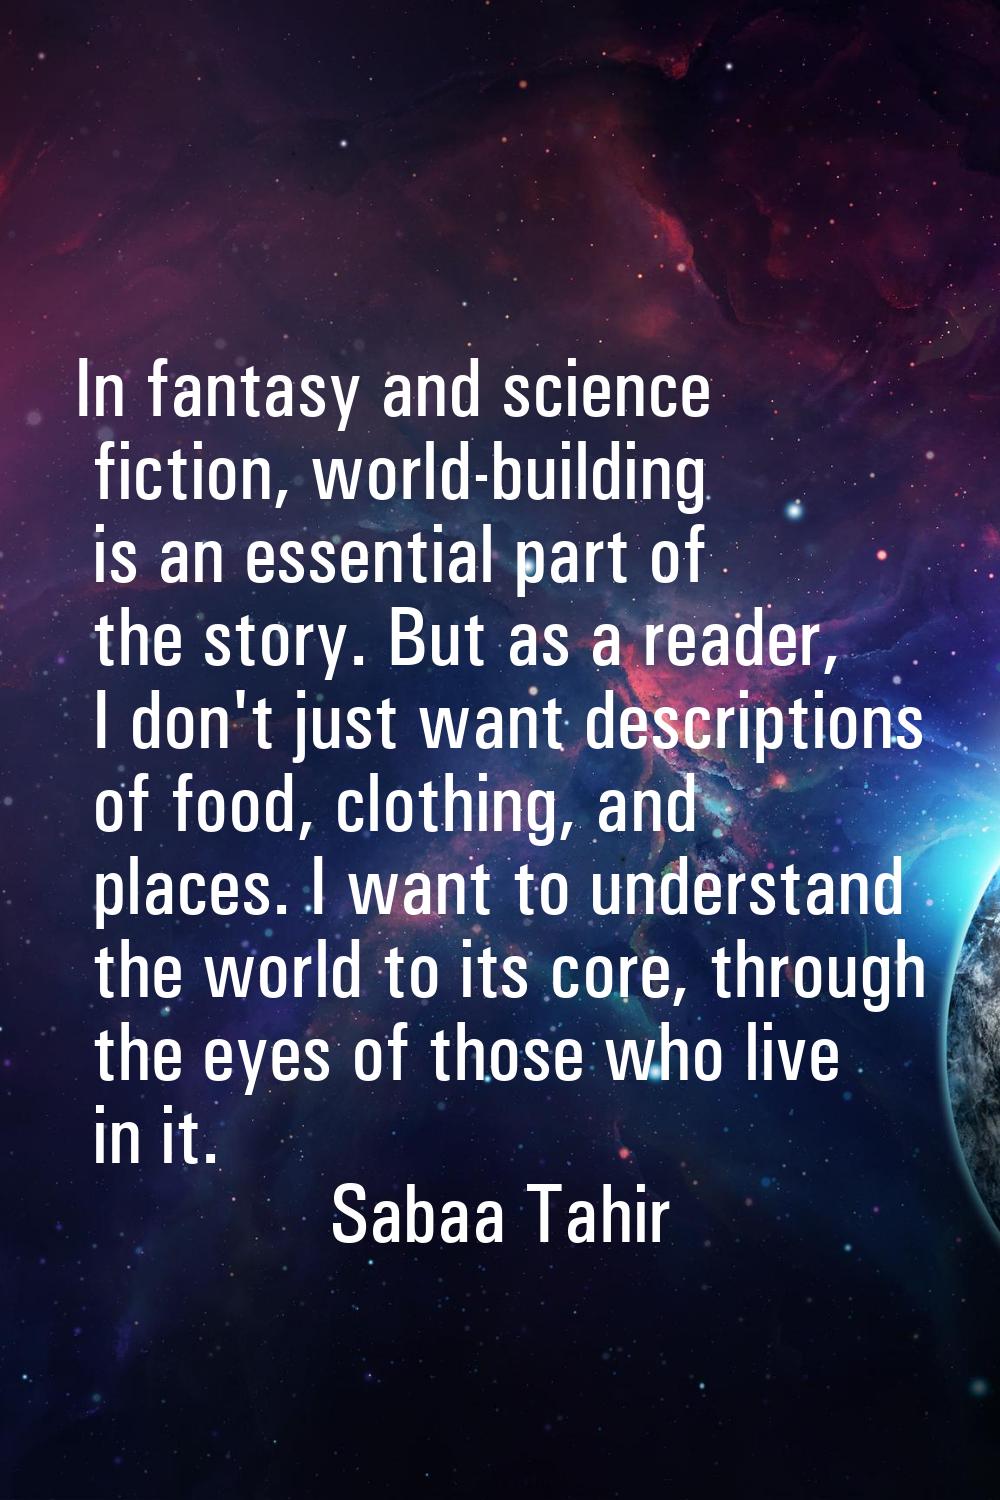 In fantasy and science fiction, world-building is an essential part of the story. But as a reader, 